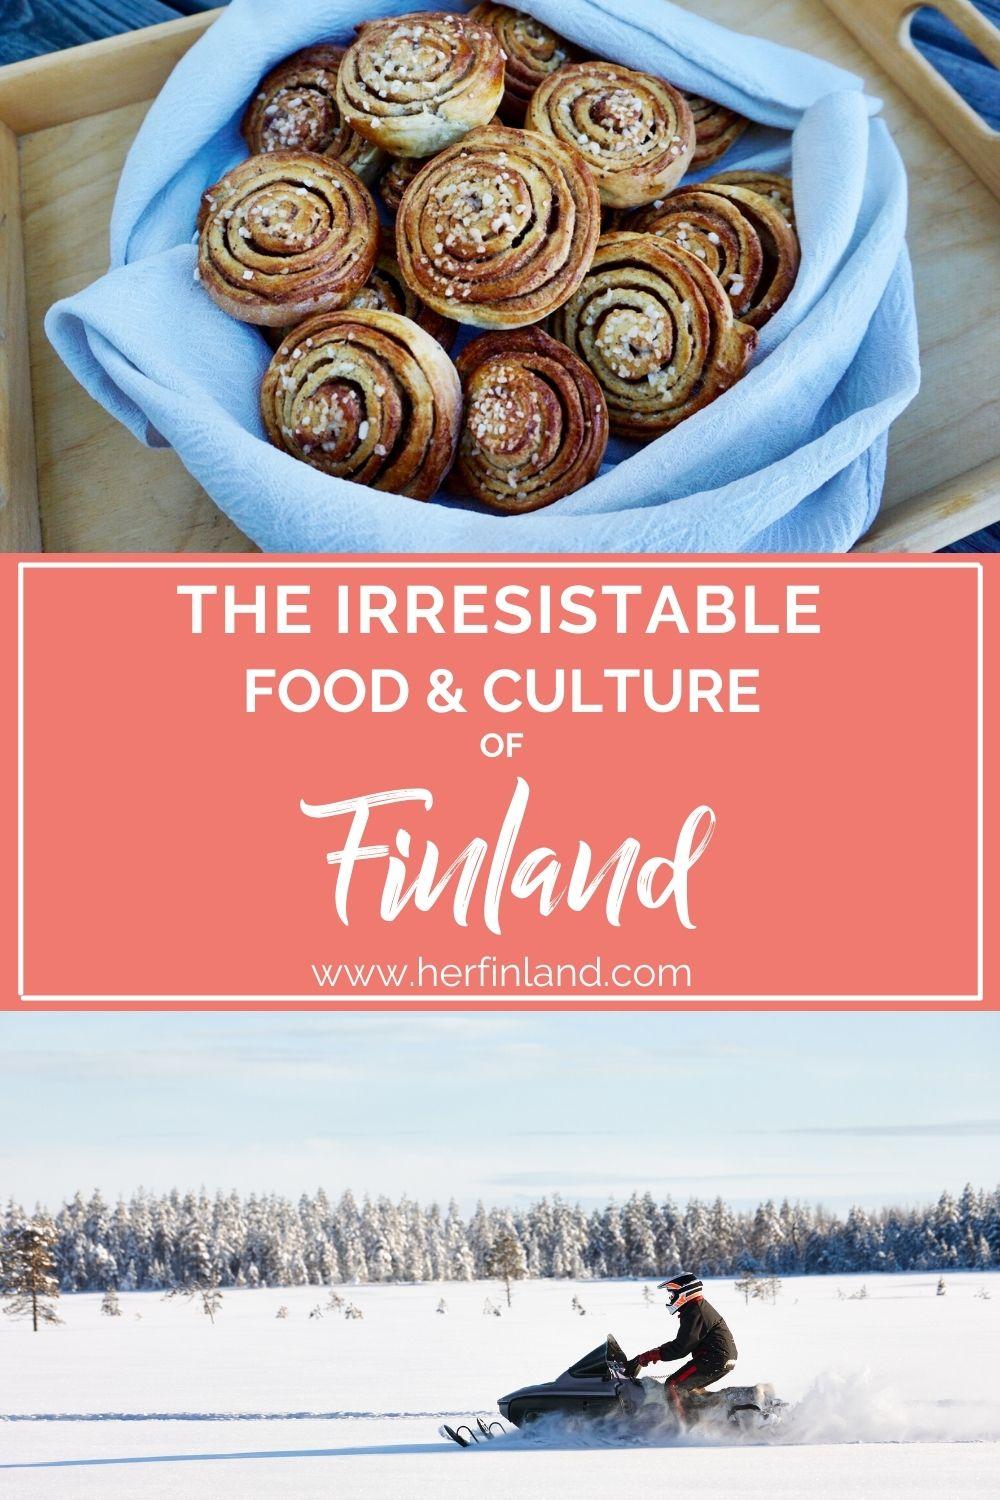 Finnish food and sports